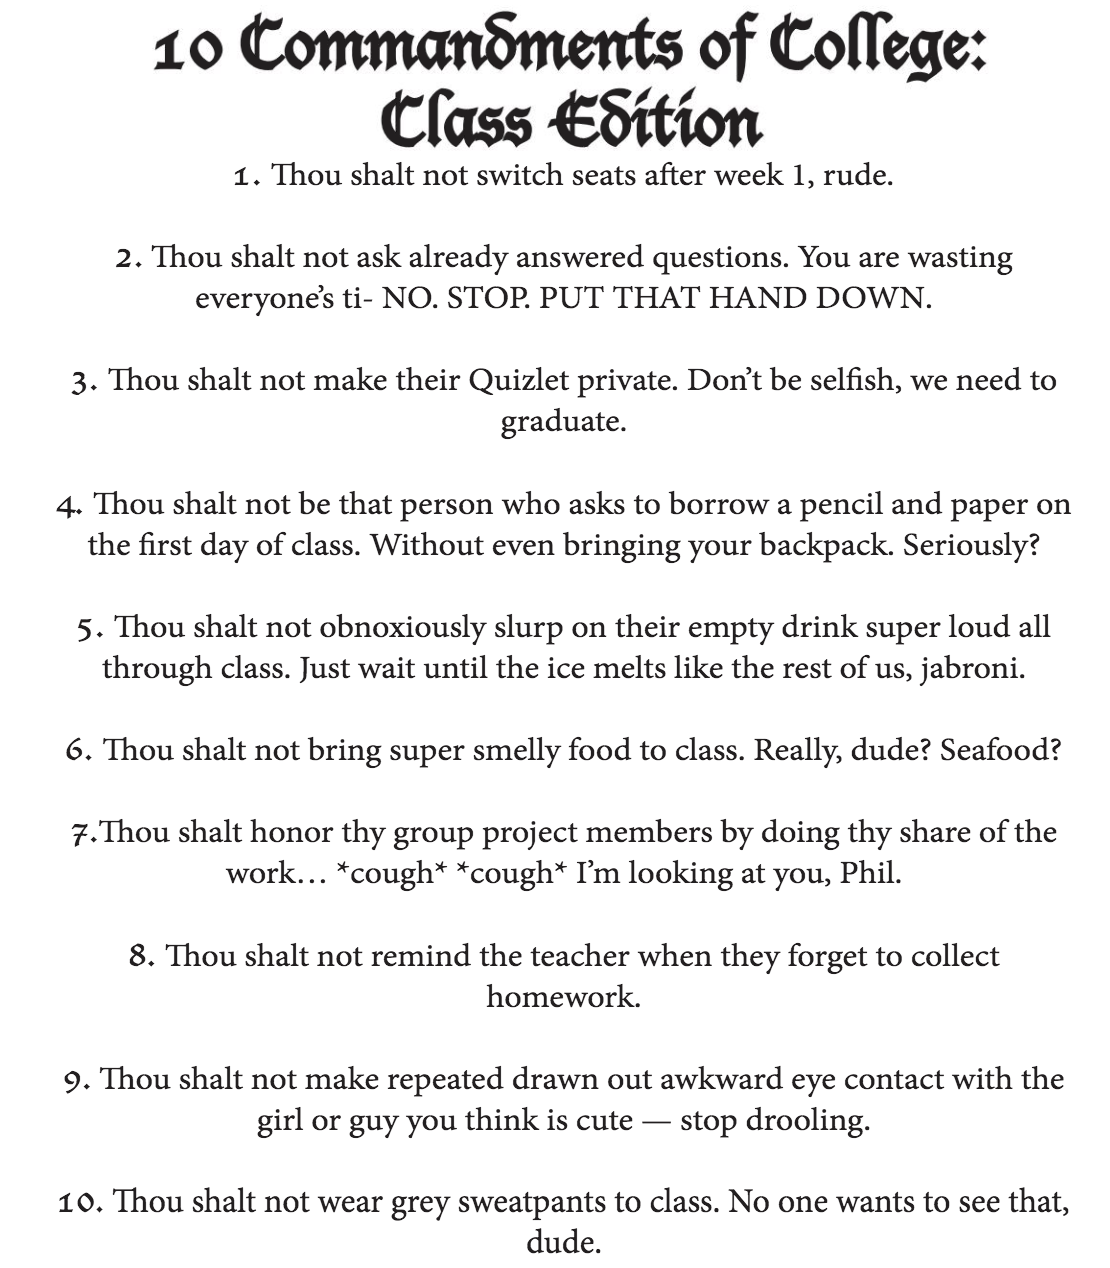 10 Commandments of College: Class Edition